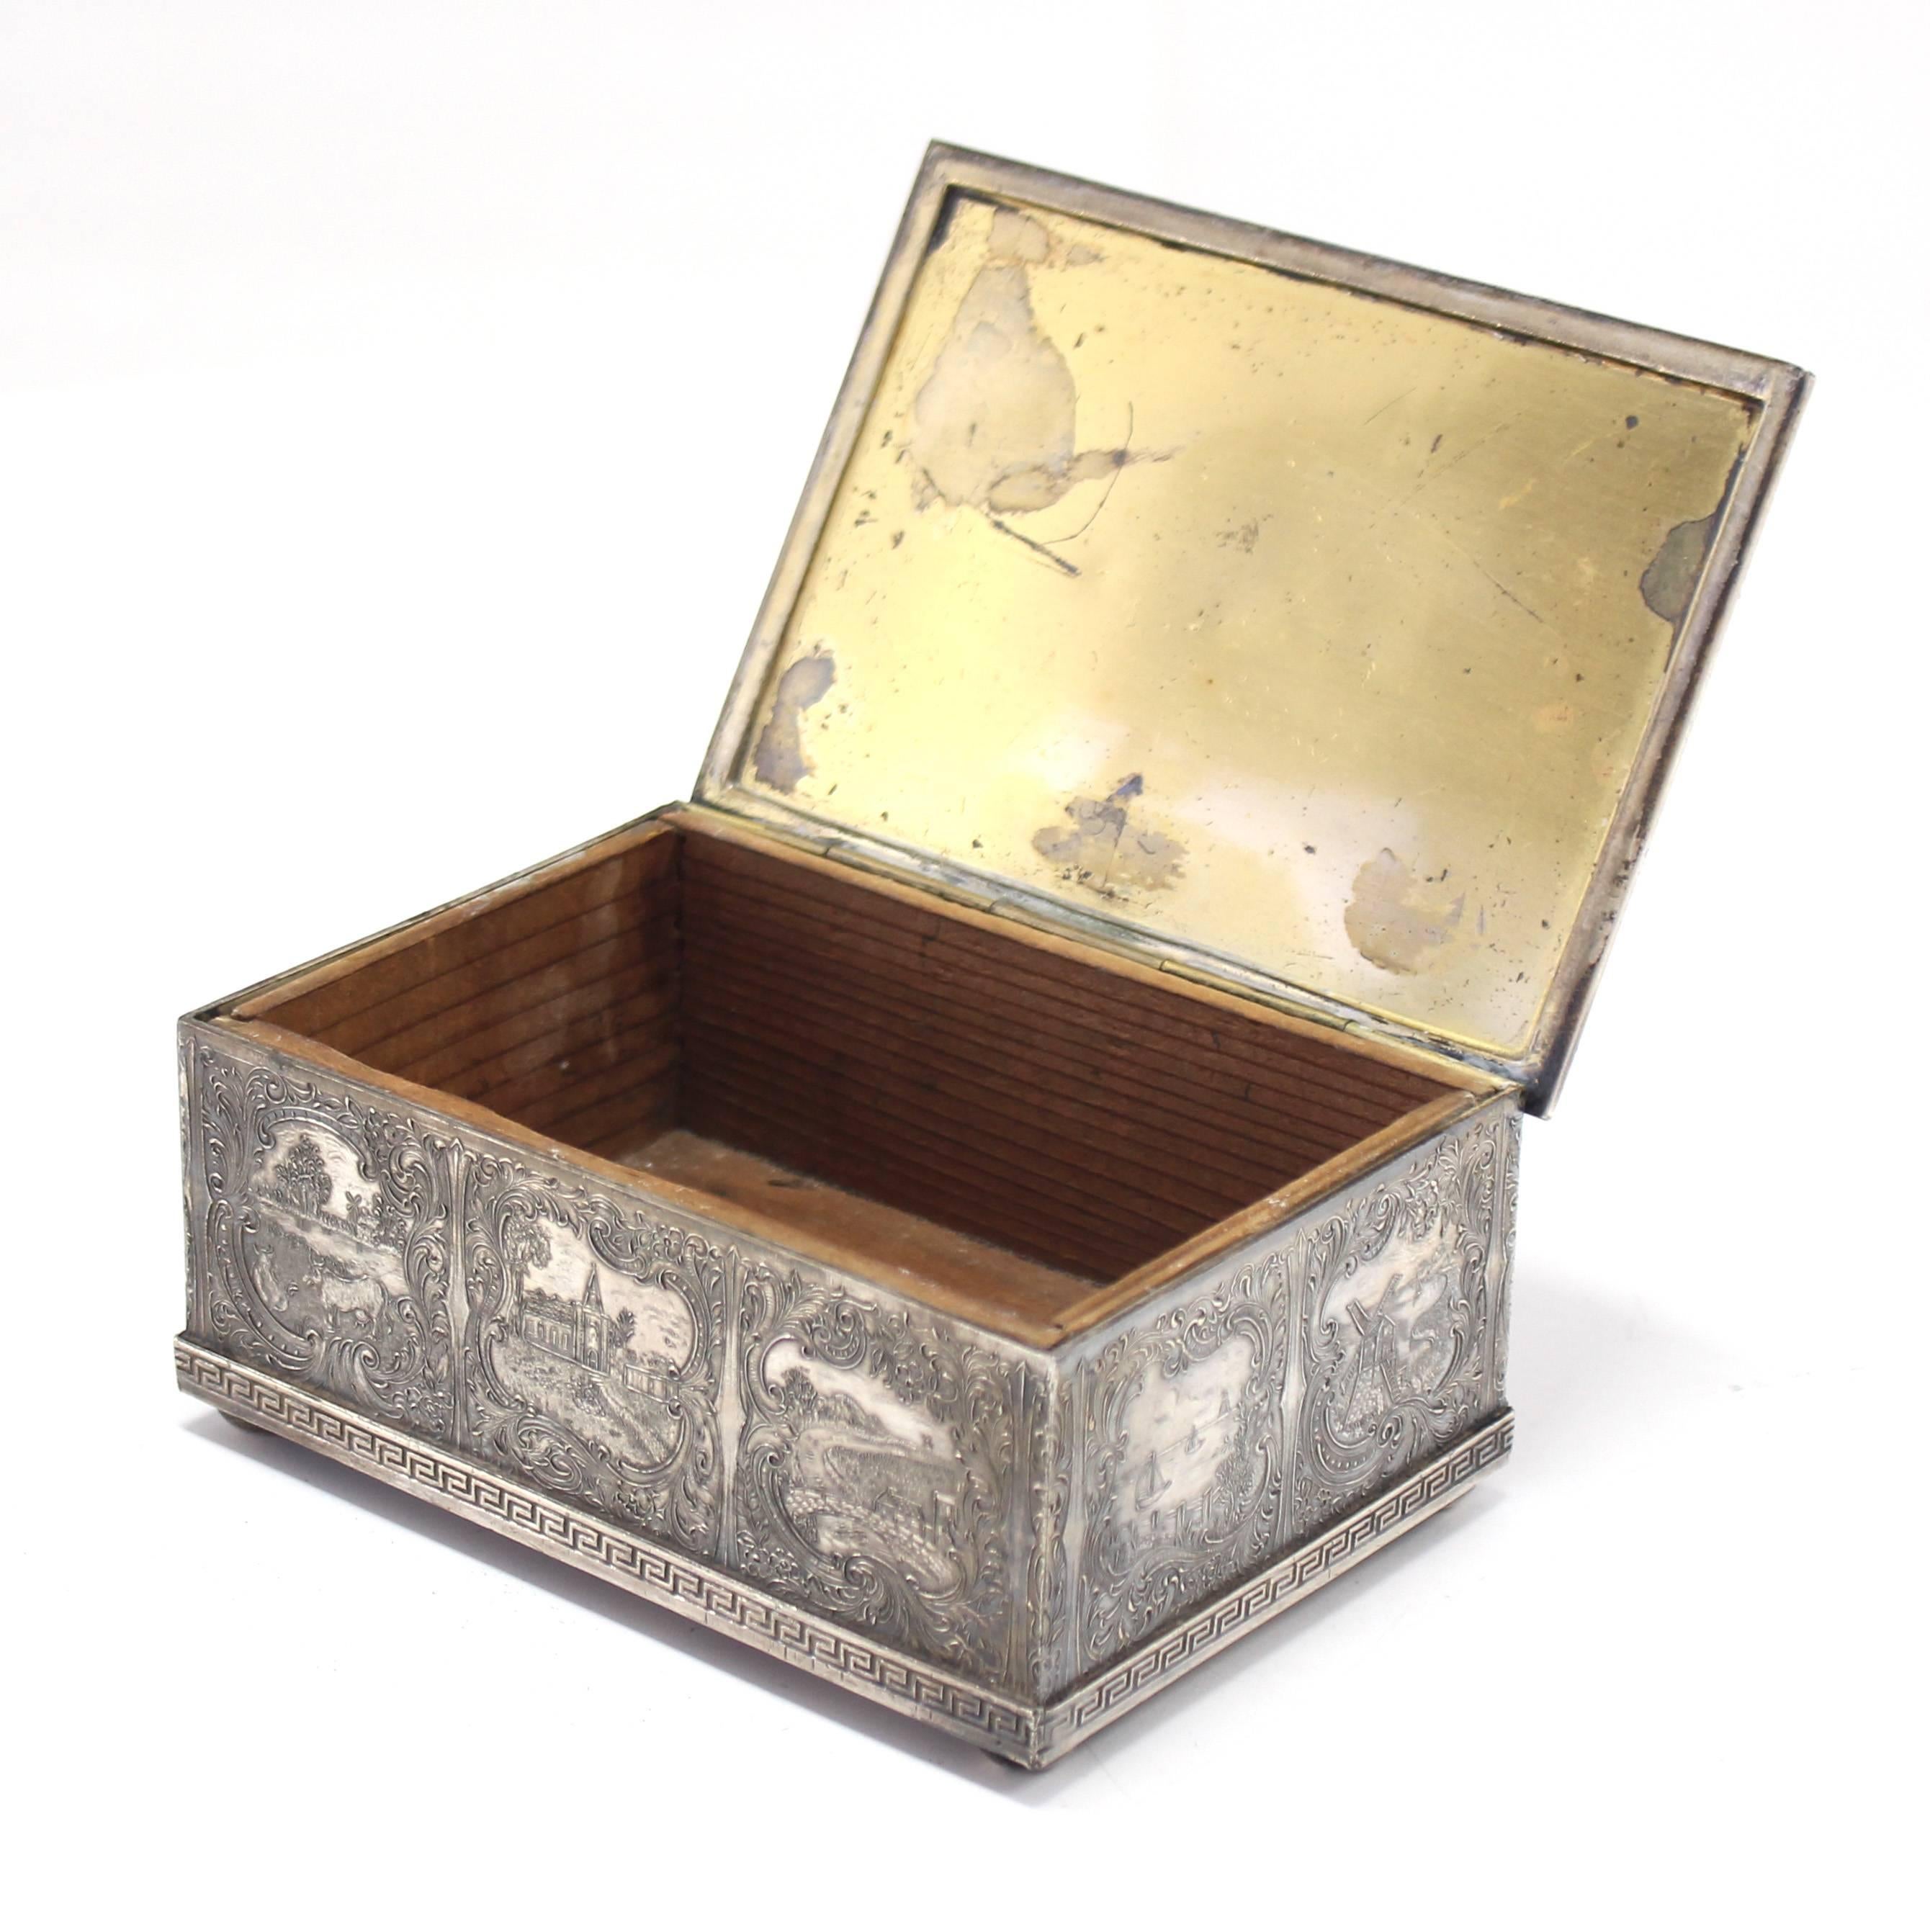 Very nice numbered and signed jewelry or tea caddie box.